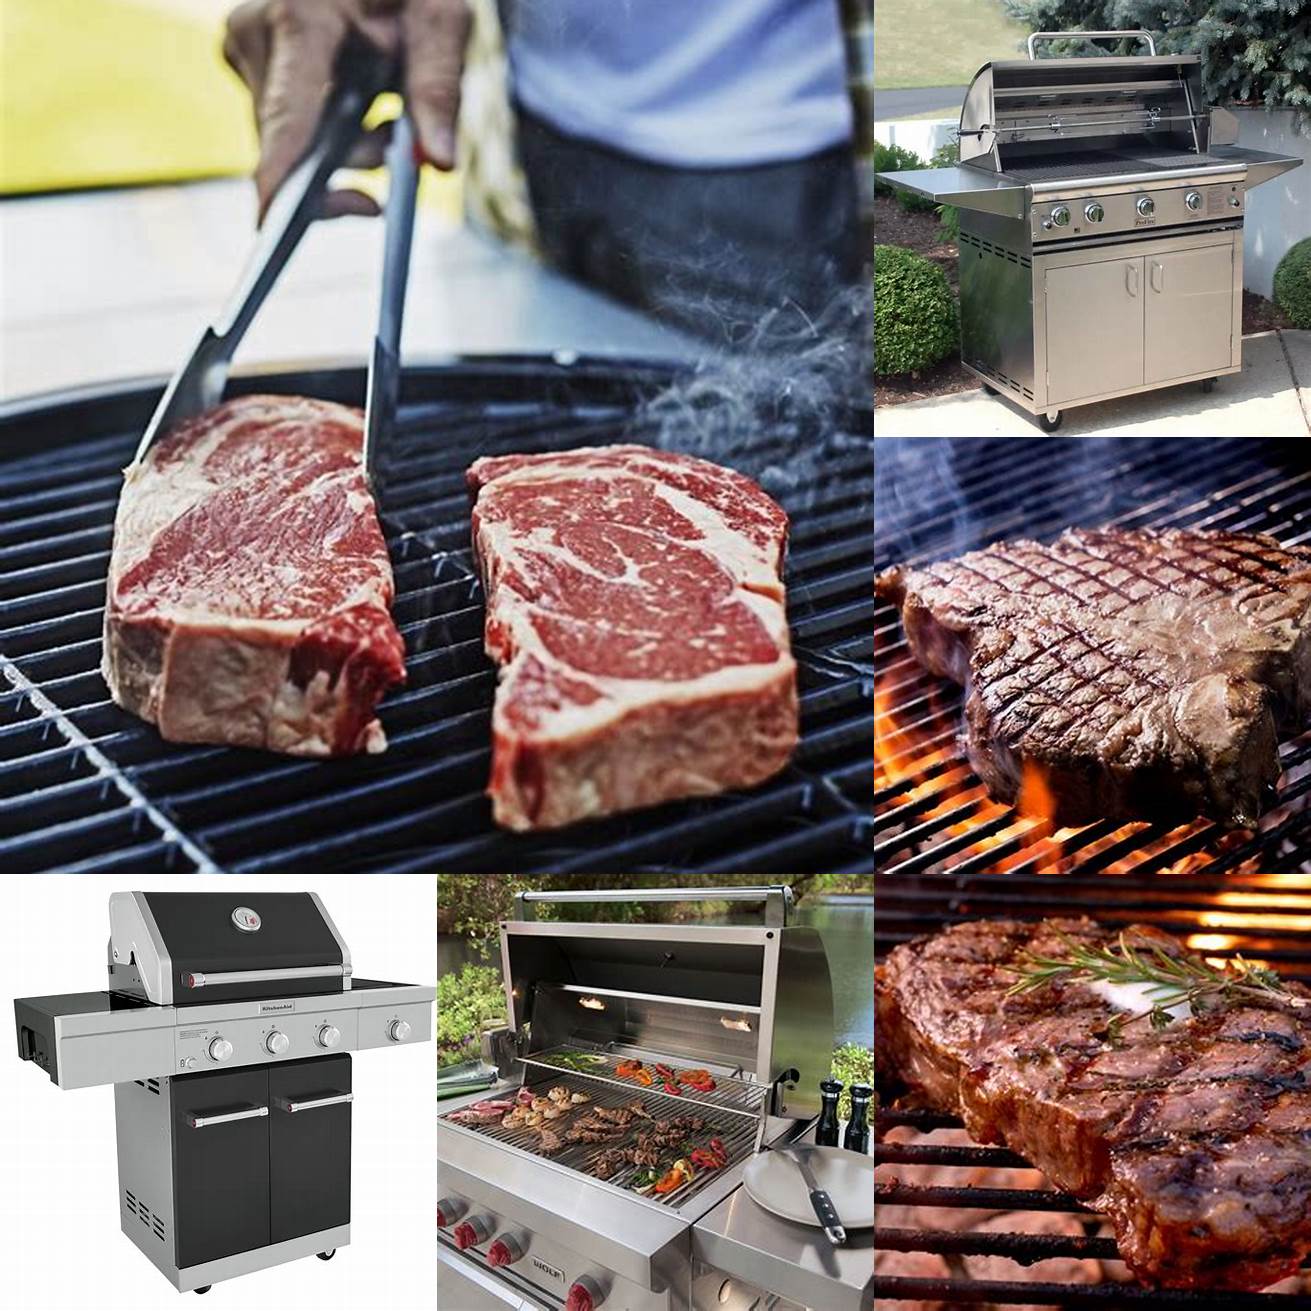 Gas grill with juicy steaks